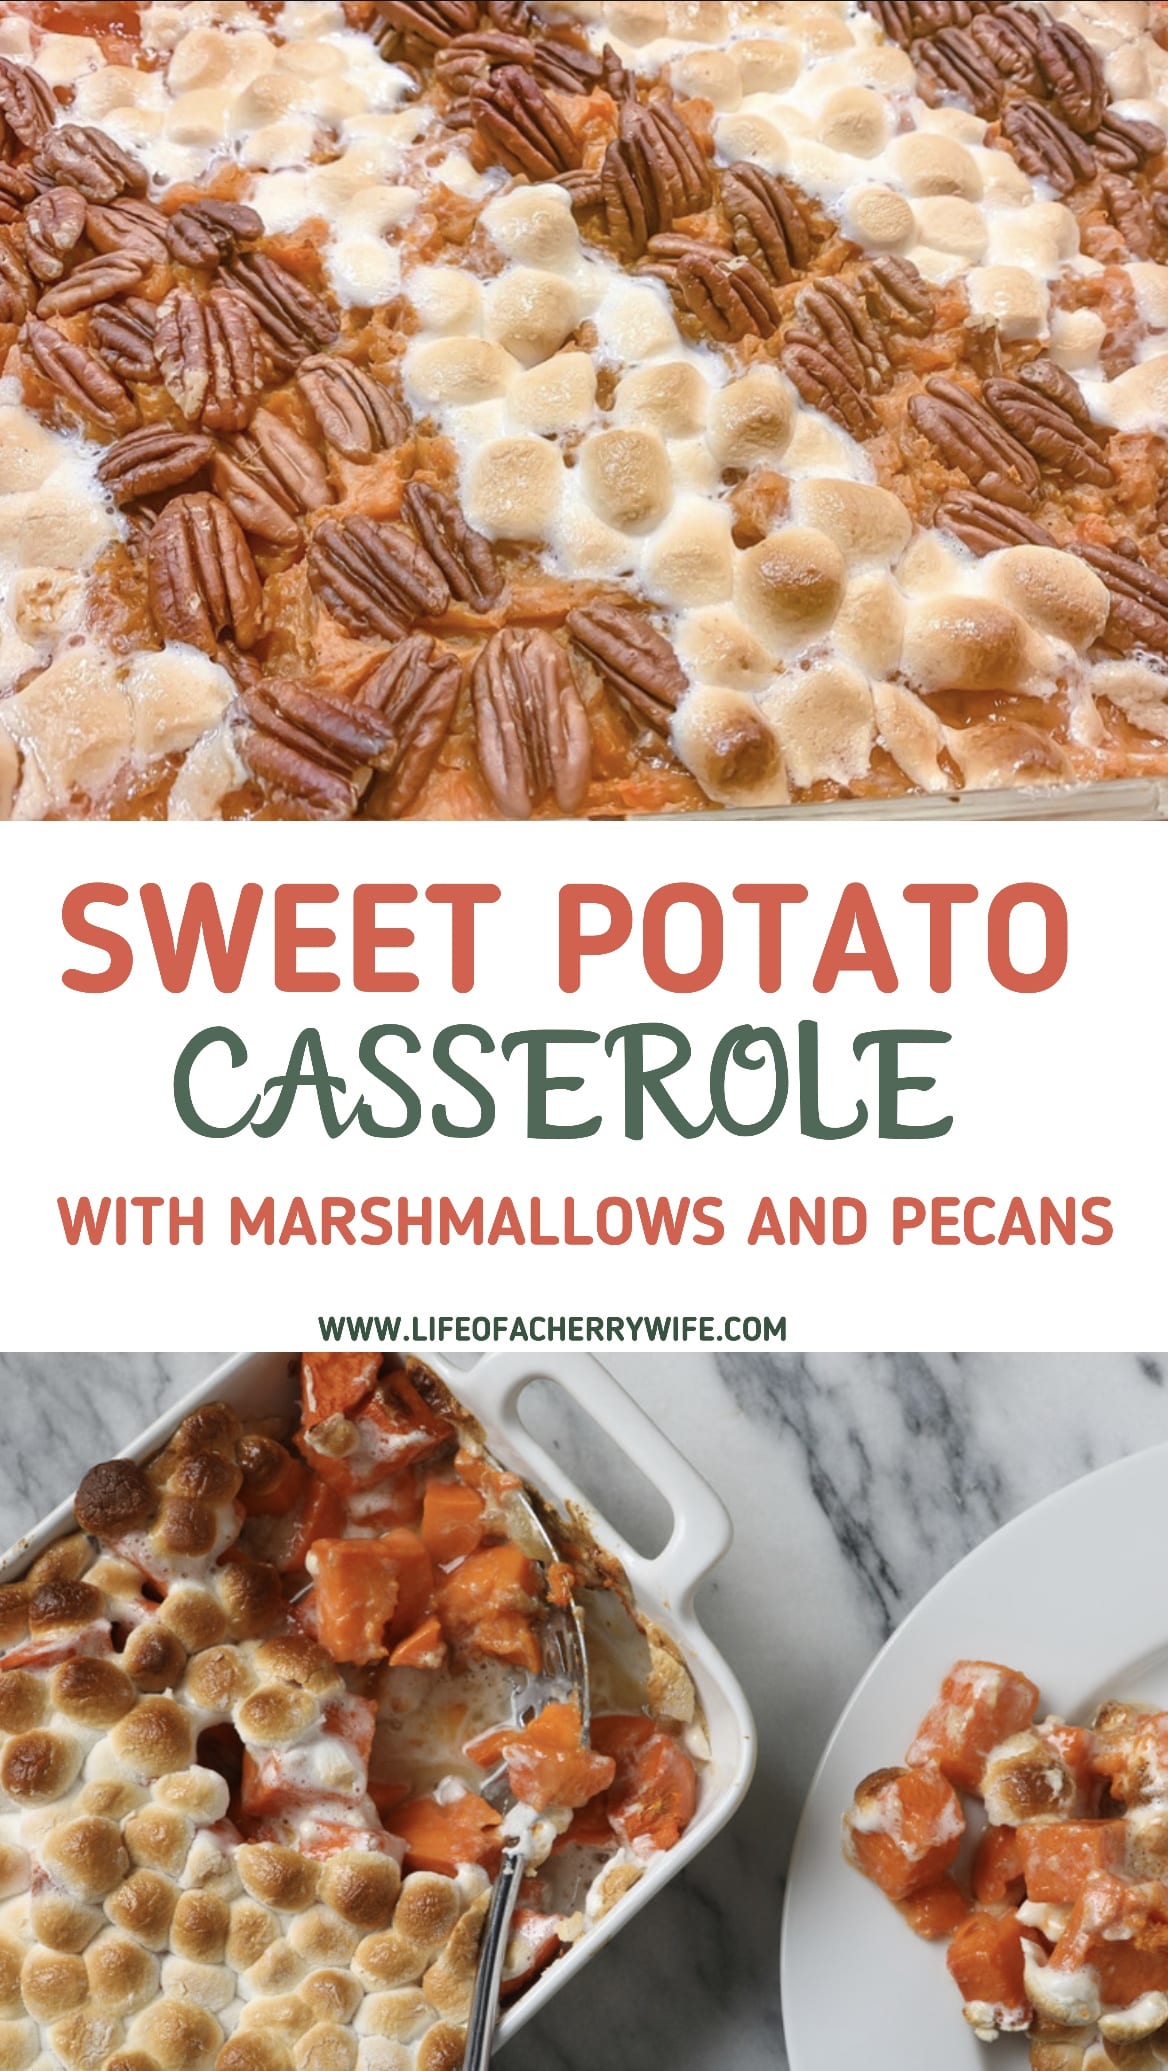 Sweet Potato Casserole with Marshmallows and Pecans Recipe